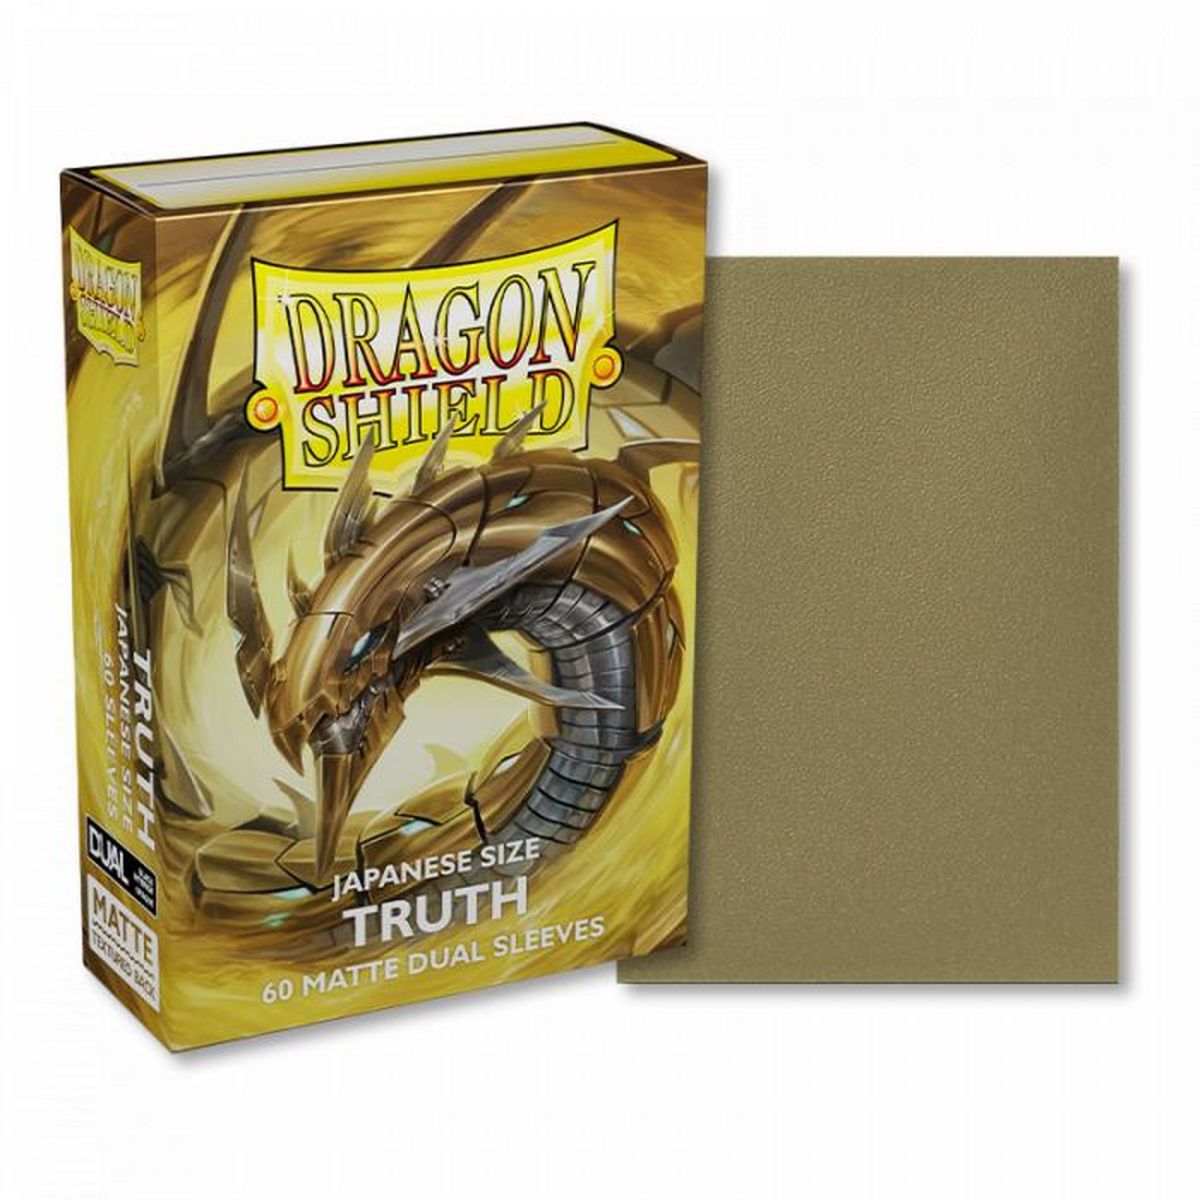 Dragon Shield - Small Sleeves - Japanese Size - Dual Matte Truth (60)